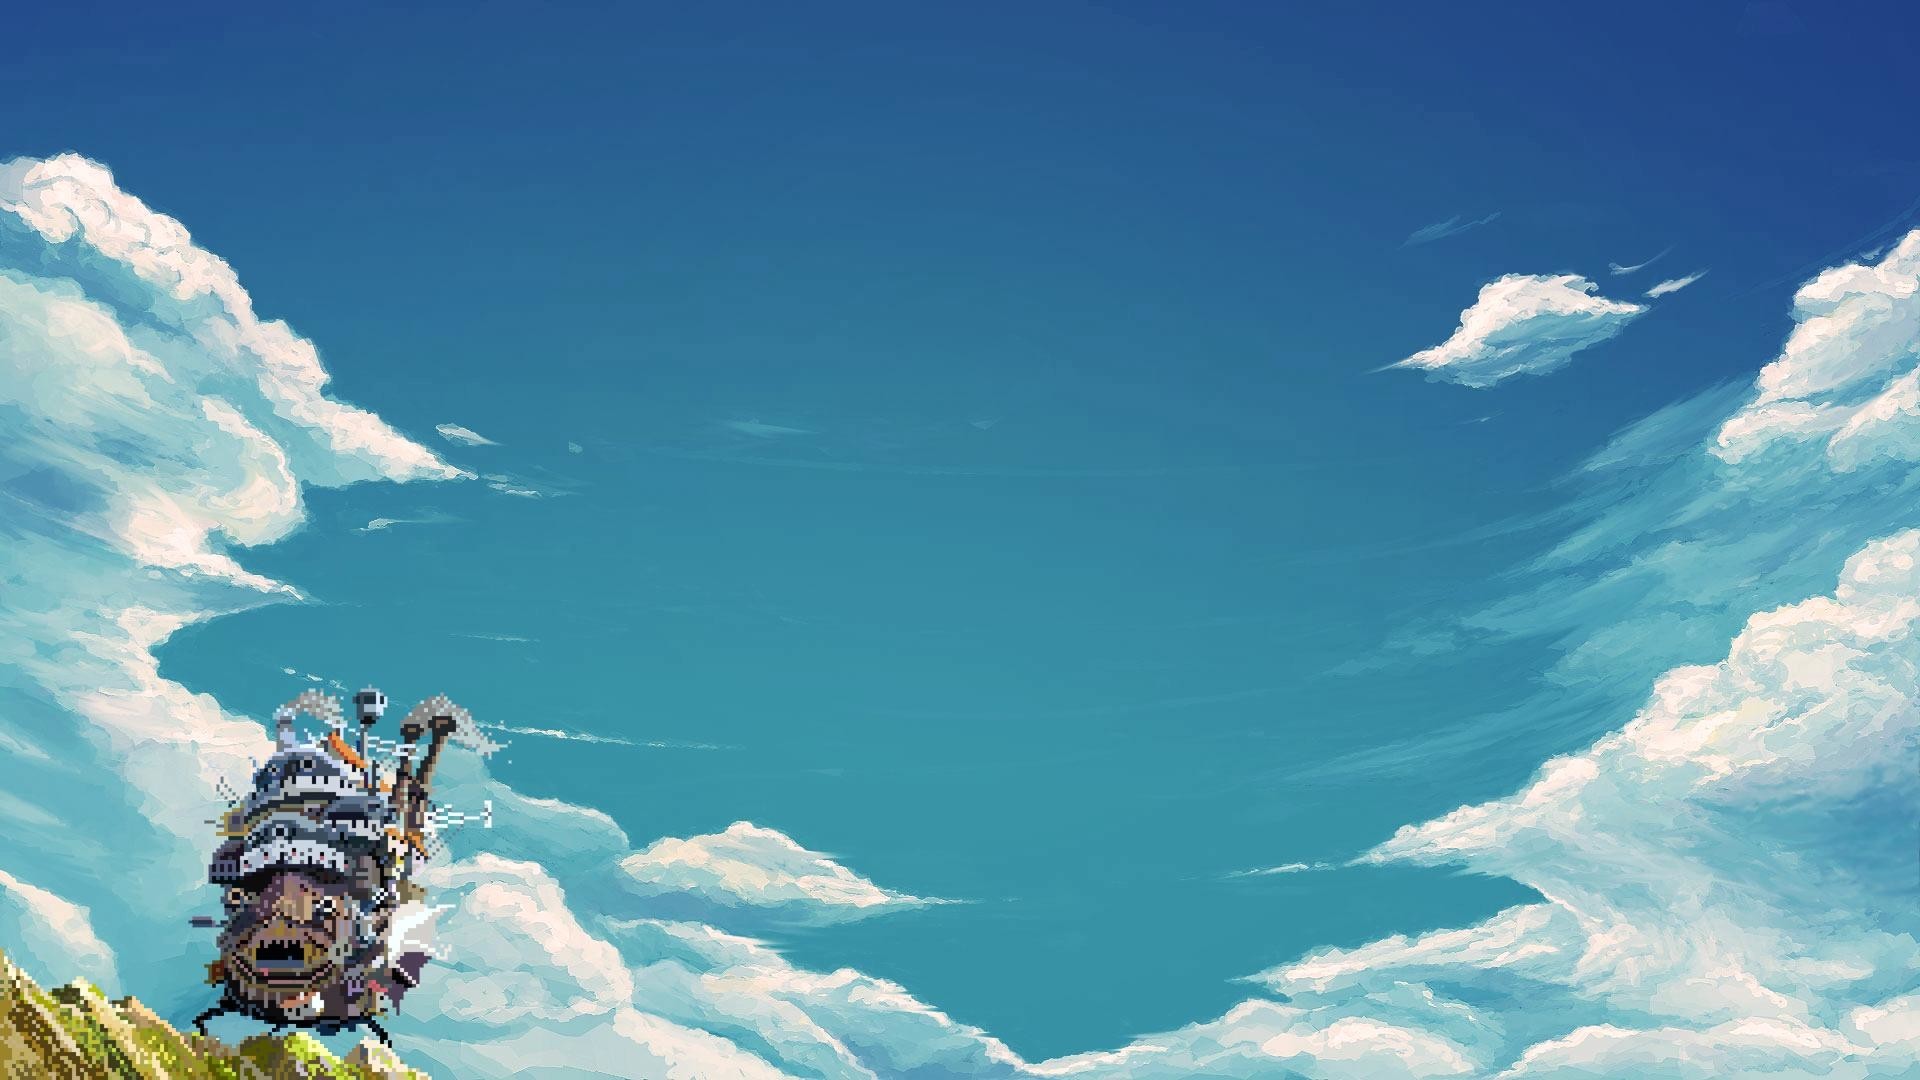 1920x1080 Howls Moving Castle Wallpapers â 